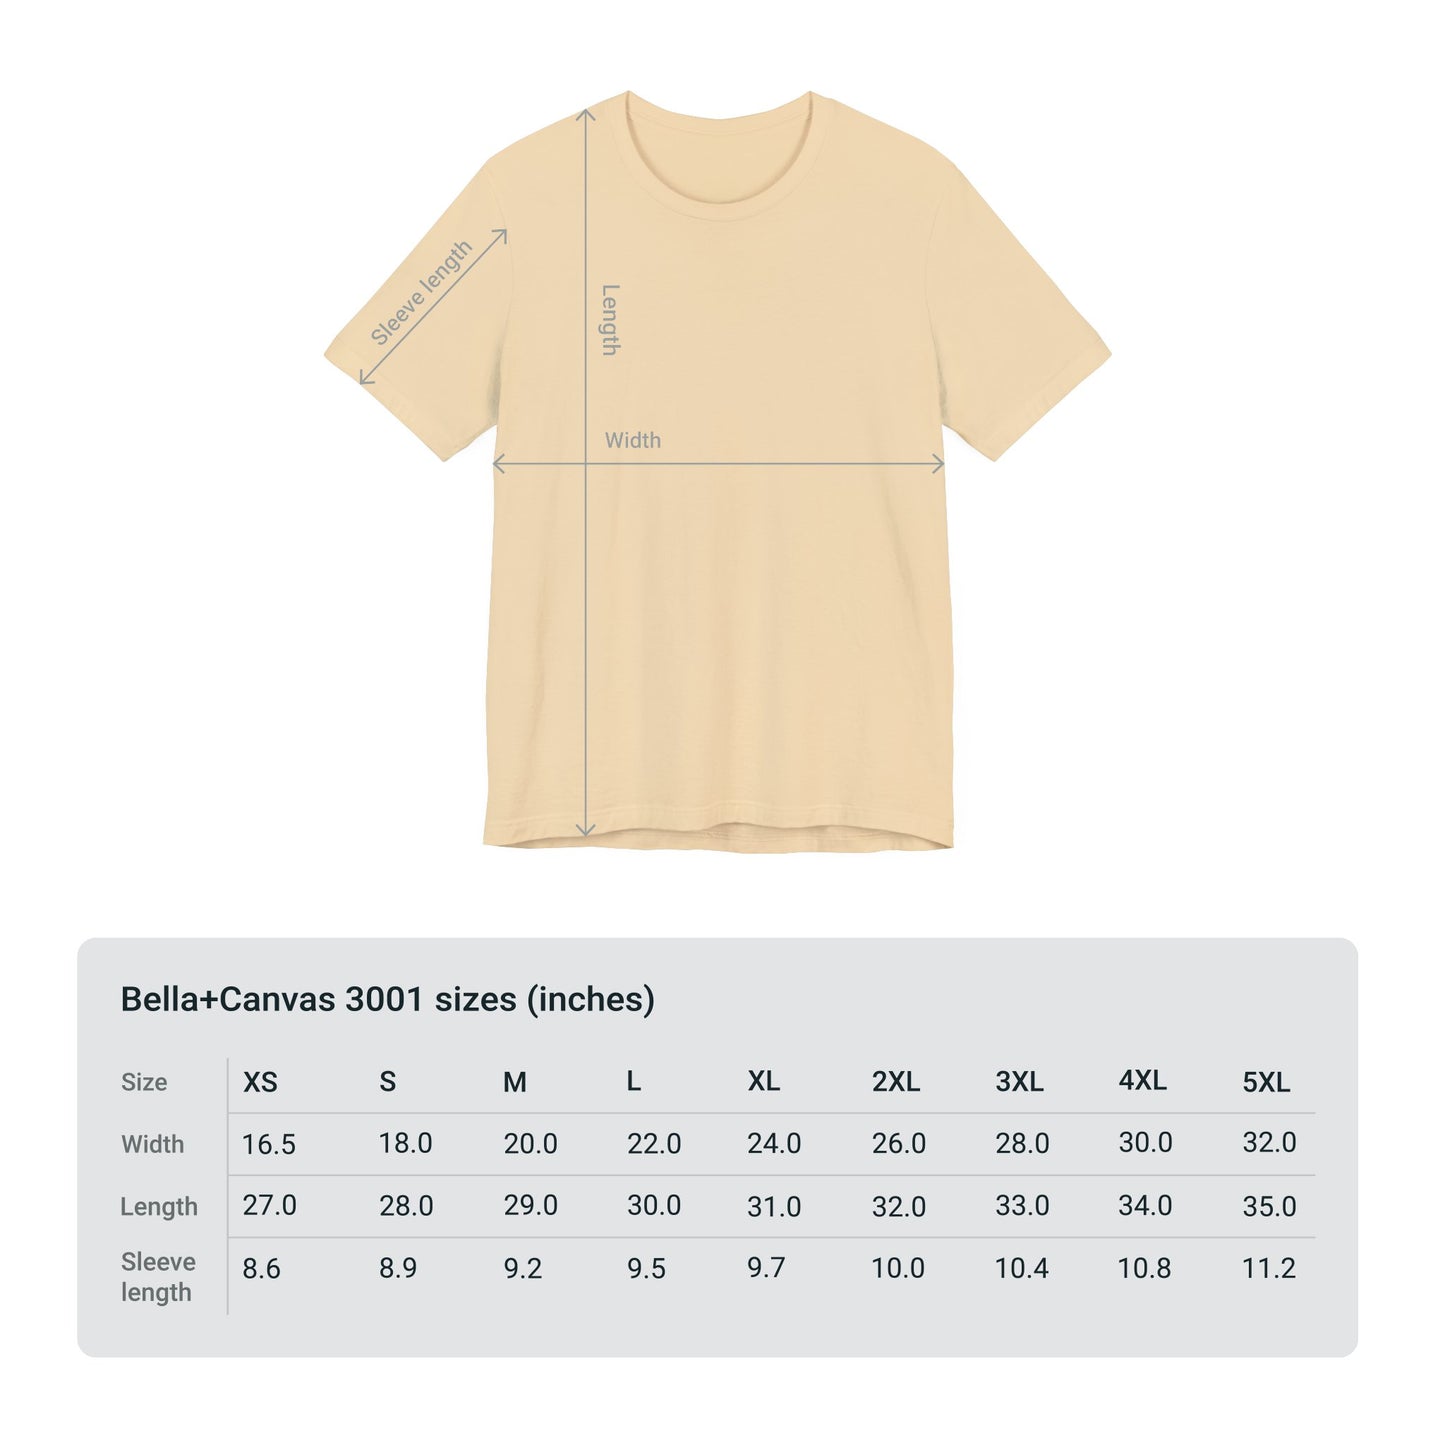 A beige Printify Voting Women's T-shirt displayed on a white background with a size chart showing measurements for Bella + Canvas 3001 sizes from XS to 5XL.